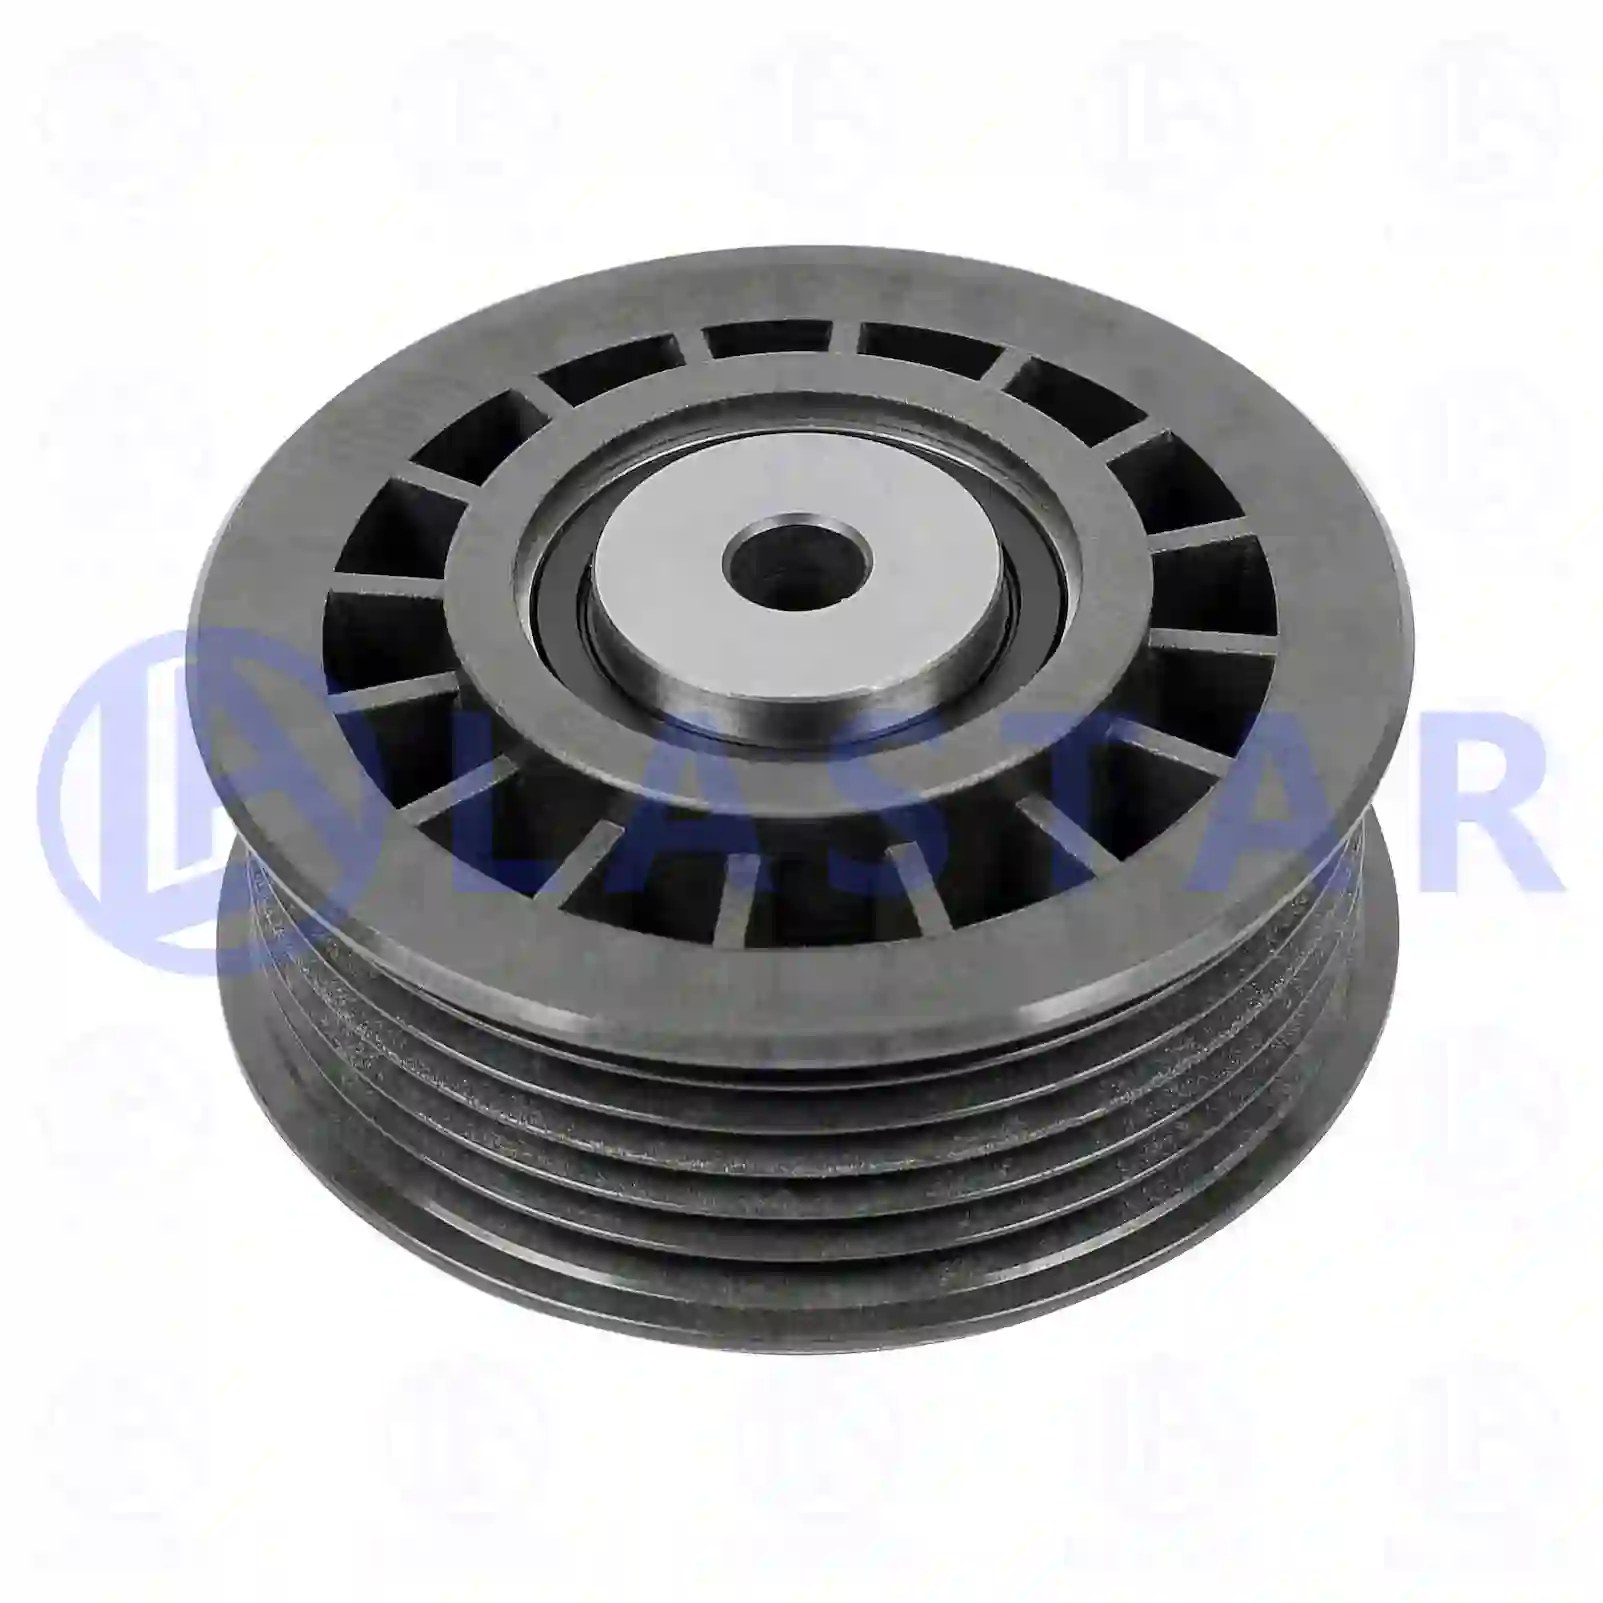 Tension roller, 77708094, 6012000770, , , ||  77708094 Lastar Spare Part | Truck Spare Parts, Auotomotive Spare Parts Tension roller, 77708094, 6012000770, , , ||  77708094 Lastar Spare Part | Truck Spare Parts, Auotomotive Spare Parts